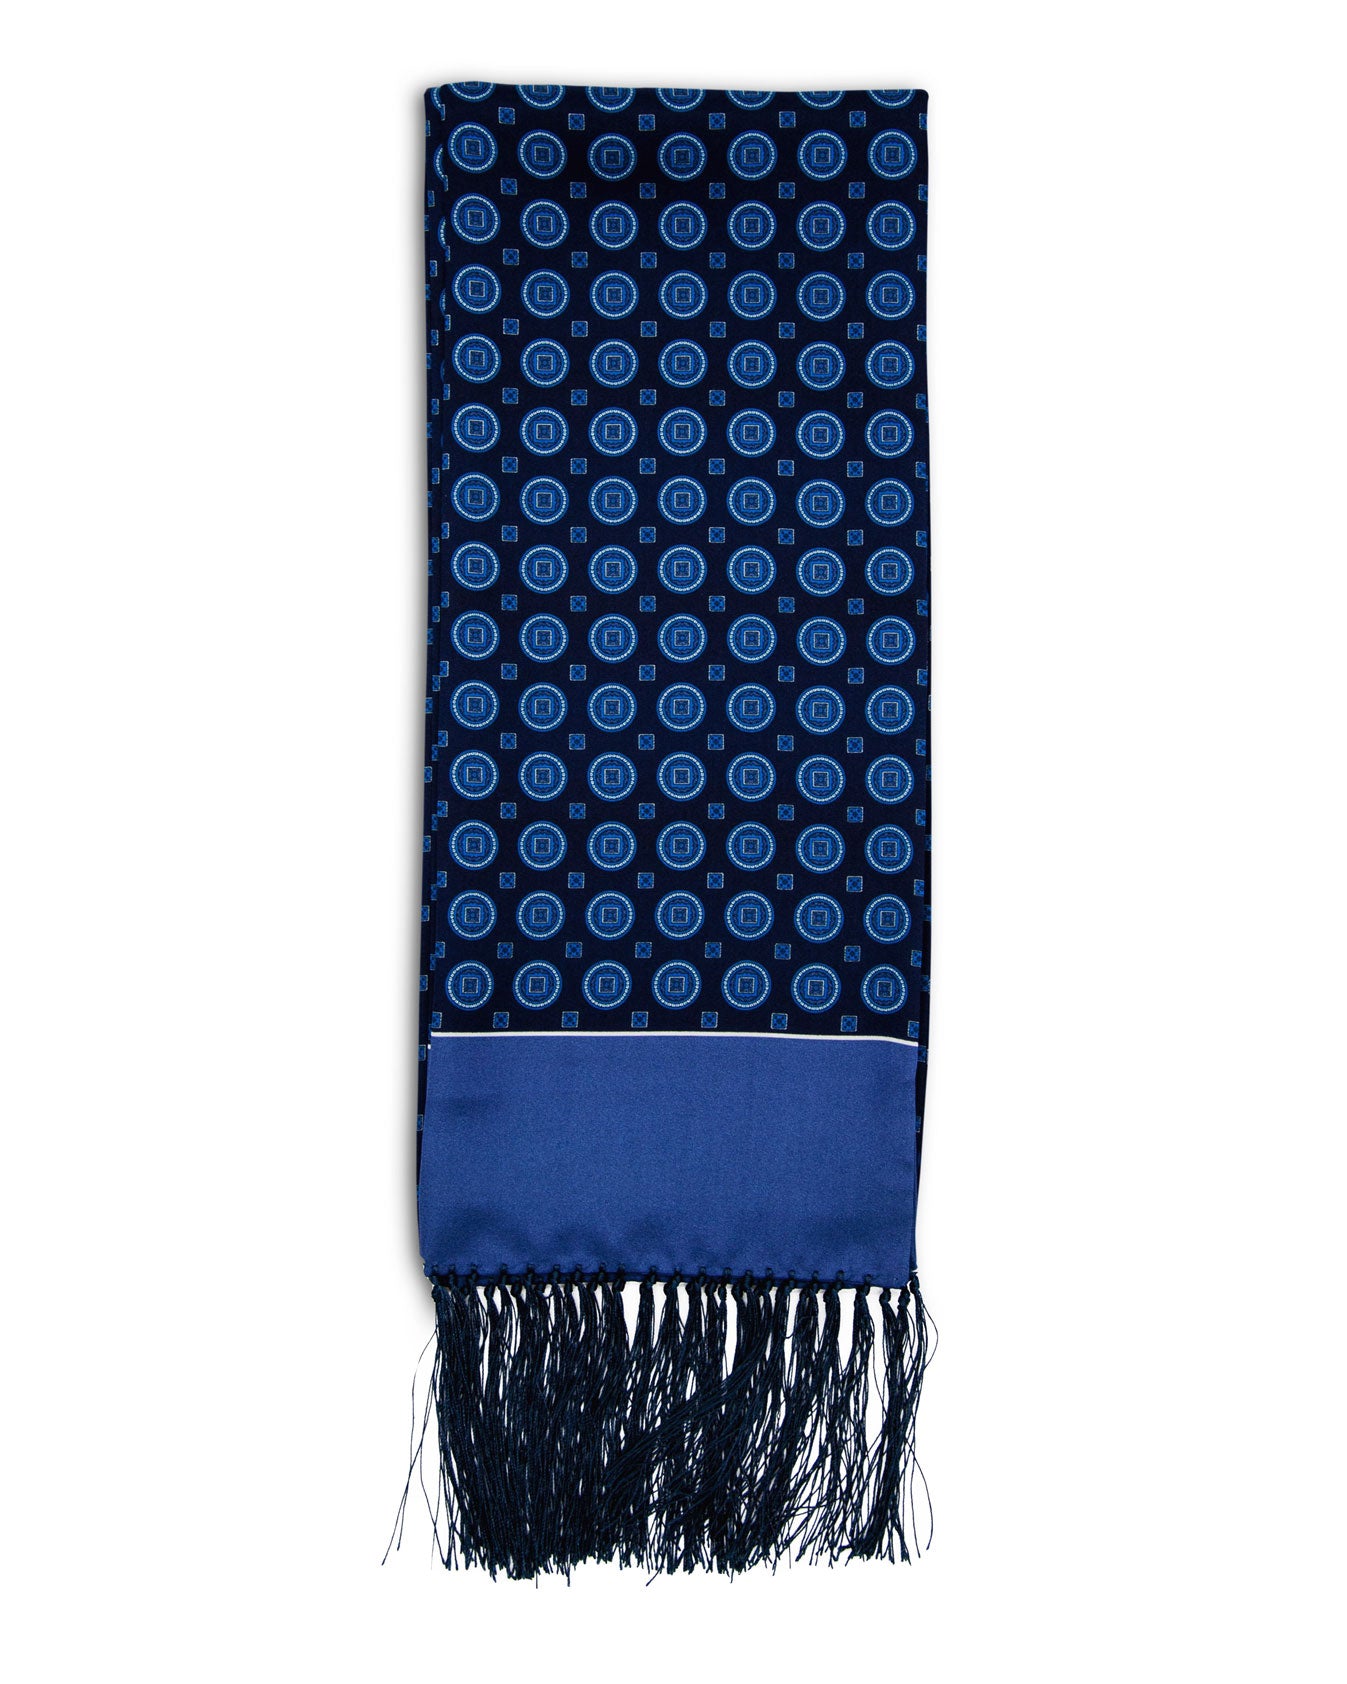 A flat view of 'The Palm' blue silk aviator scarf. Clearly showing the light blue circle patterns on a navy-blue ground with matching light blue end border and dark 3-inch fringe.